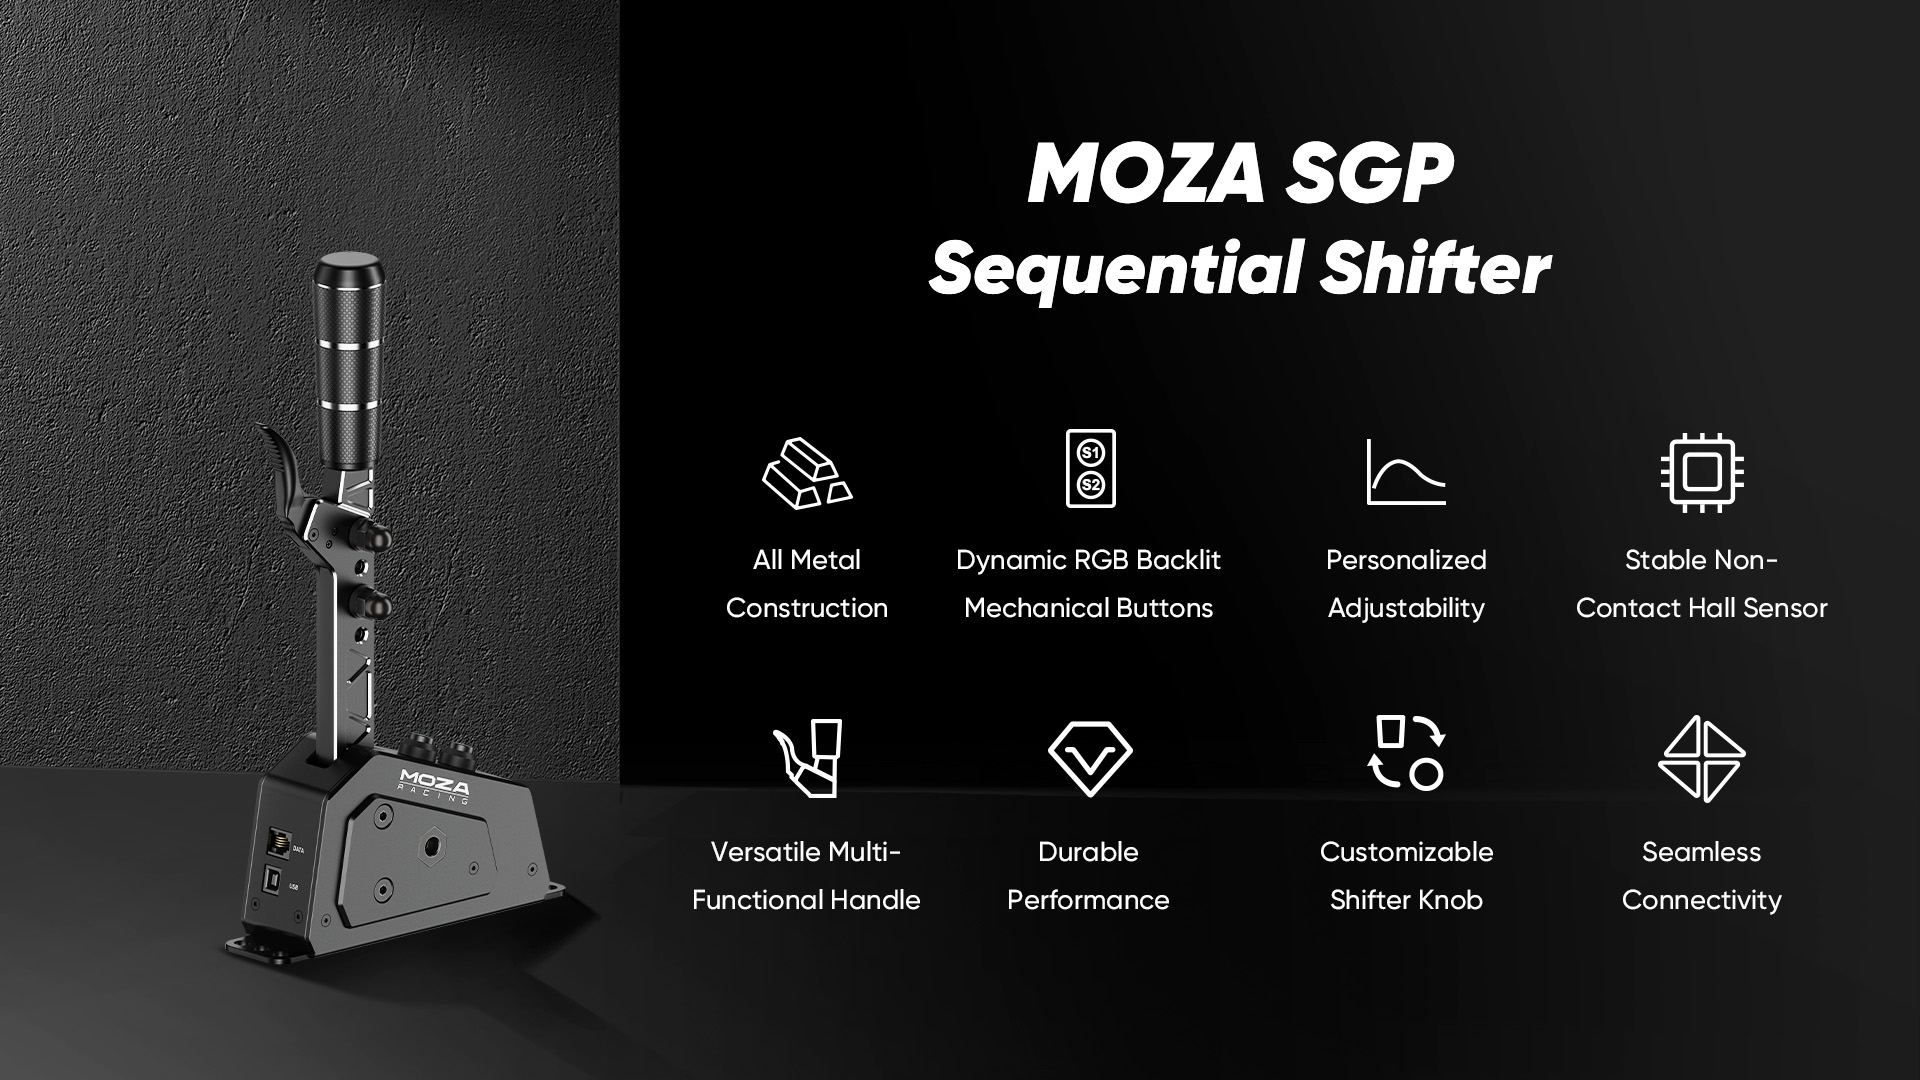 A large marketing image providing additional information about the product MOZA SGP Sequential Shifter - Additional alt info not provided